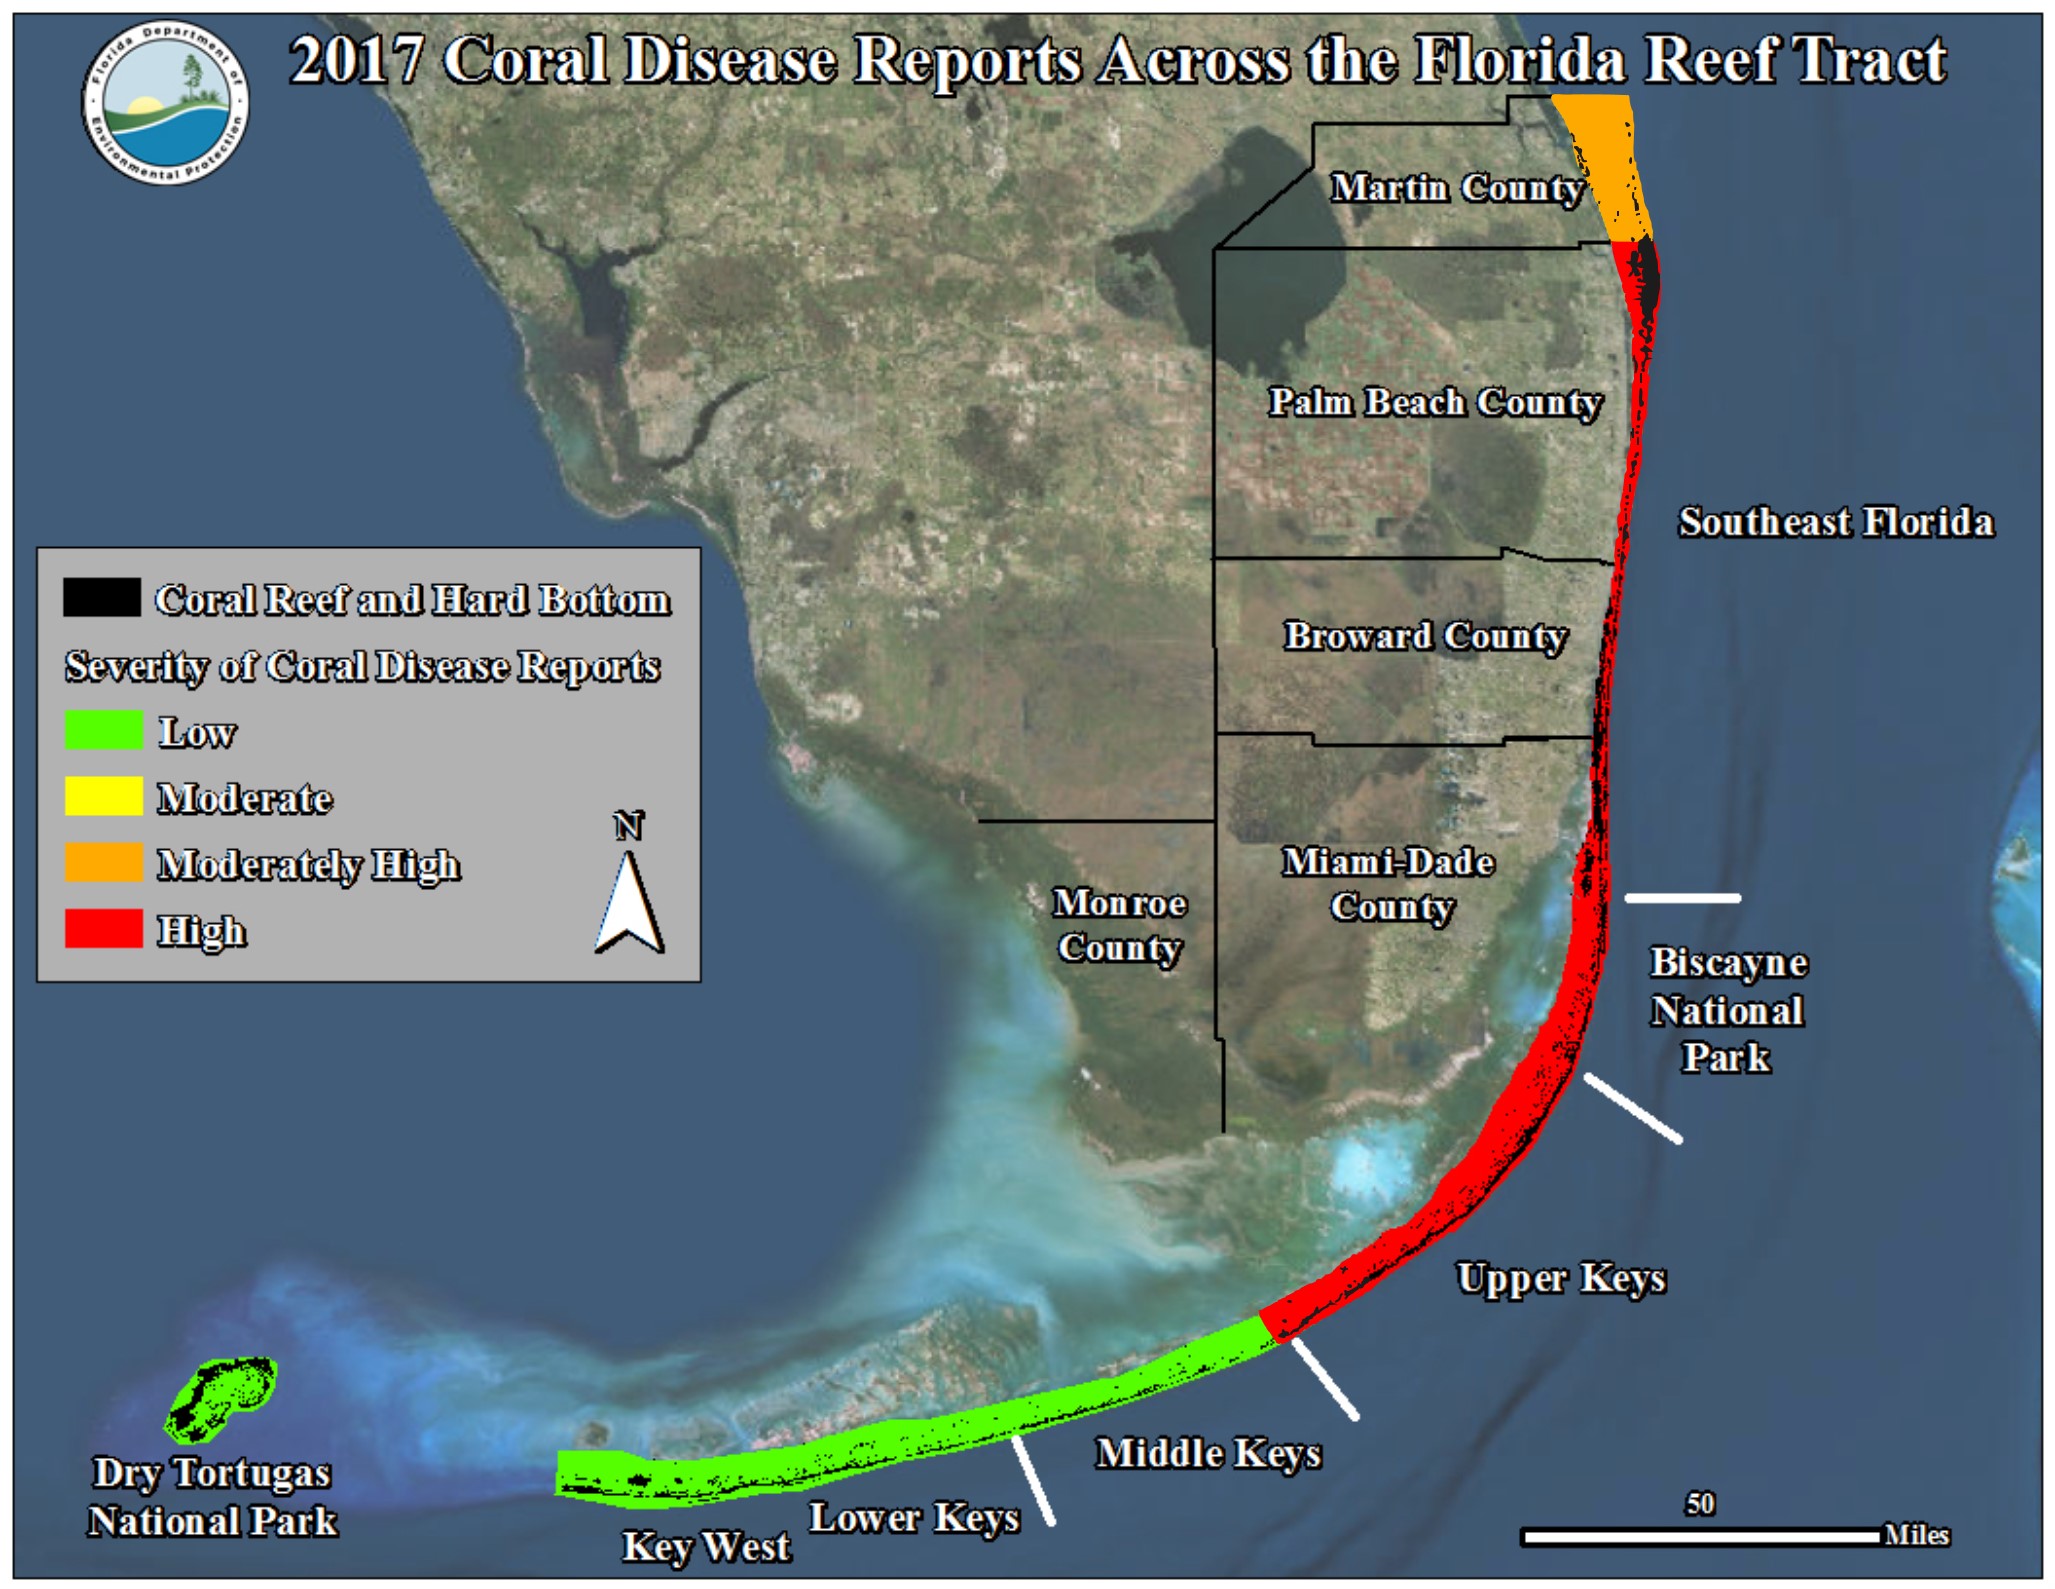 A map showing the severity of diseased coral in southeast Florida ranging from low to high.